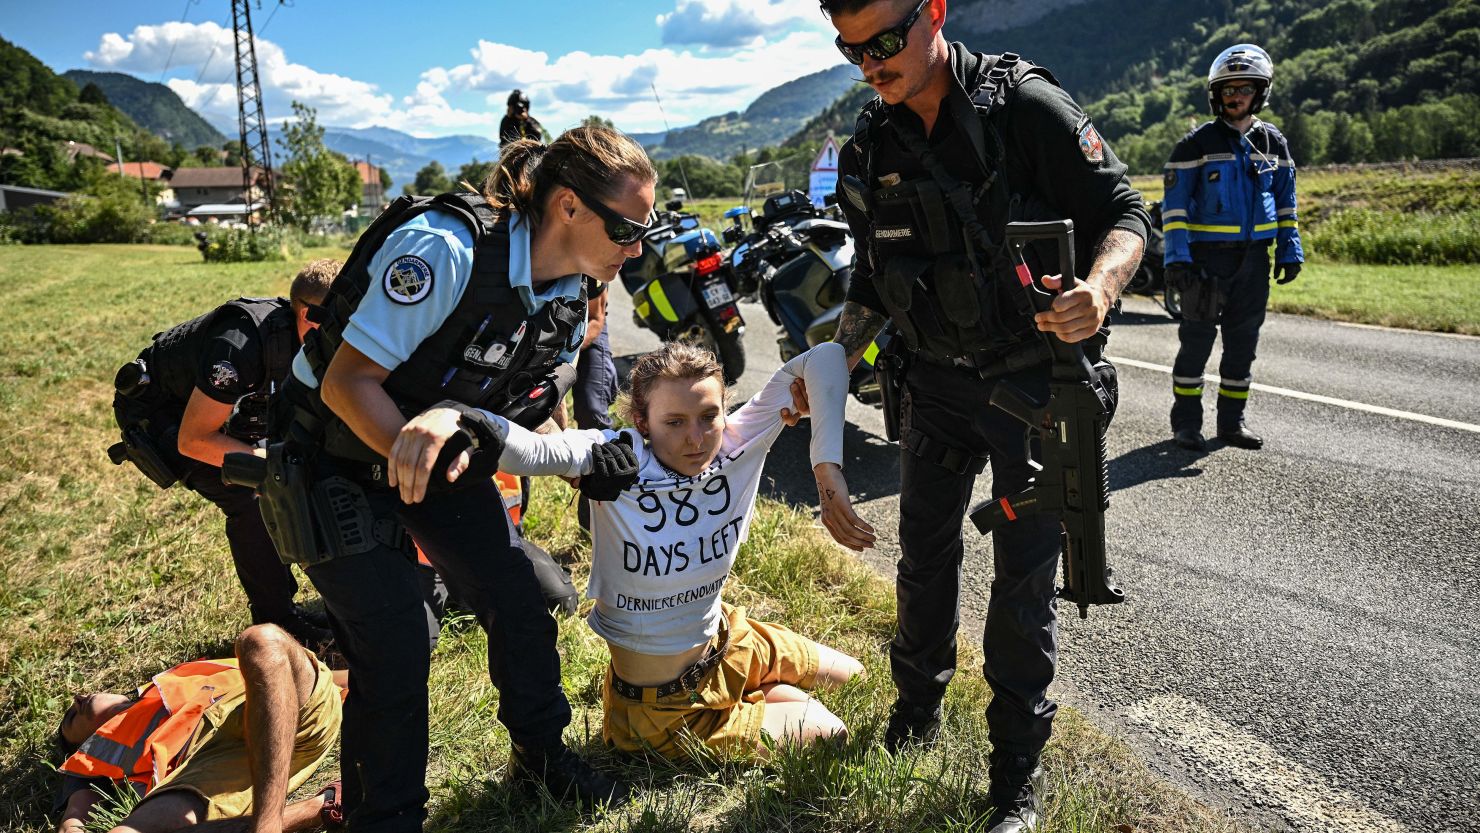 French gendarmes removed environmental protestors from the race route.